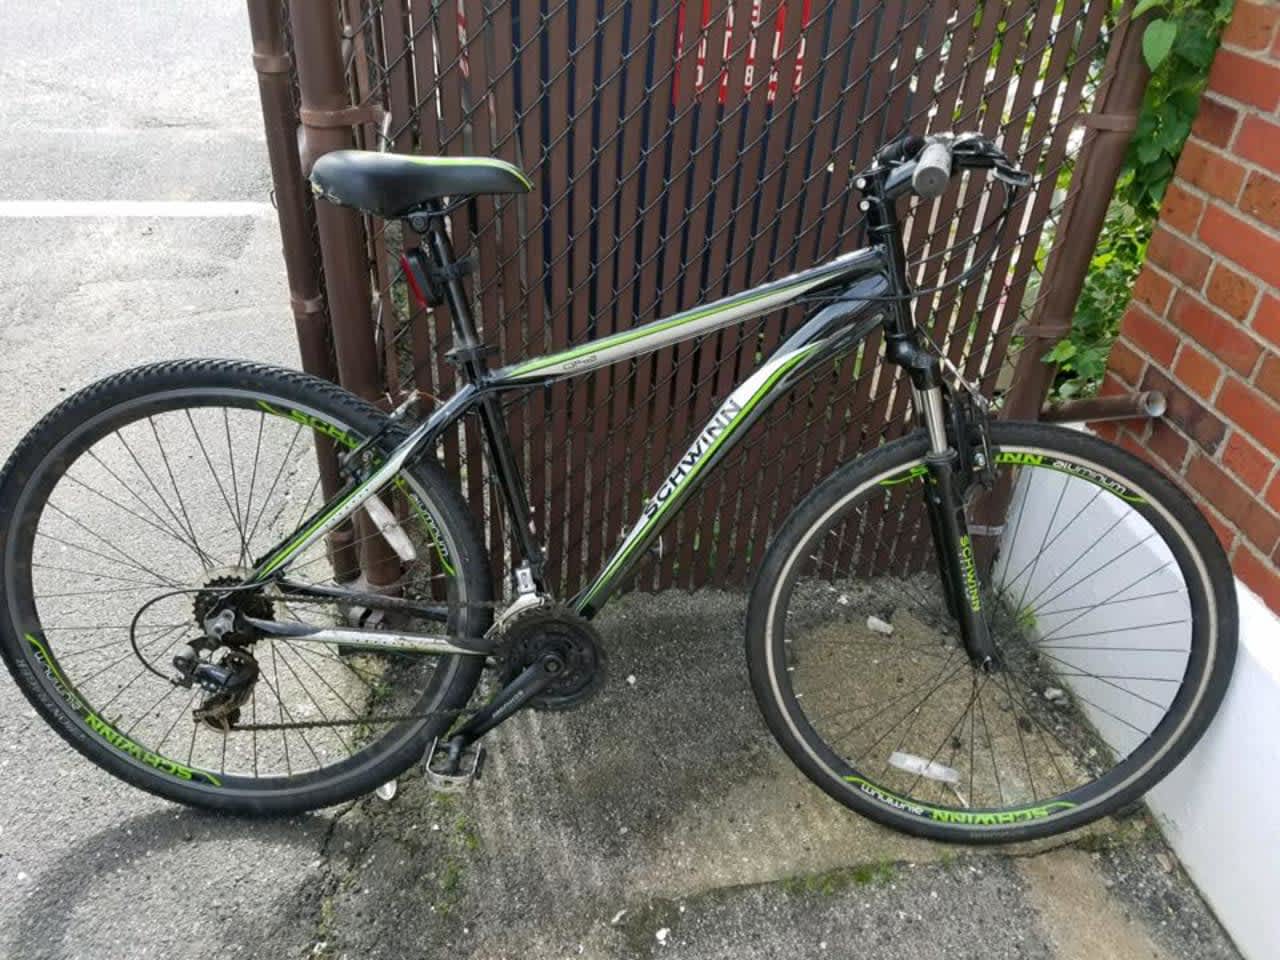 This Schwinn bicycle may have been stolen from someone's Closter property earlier this month.